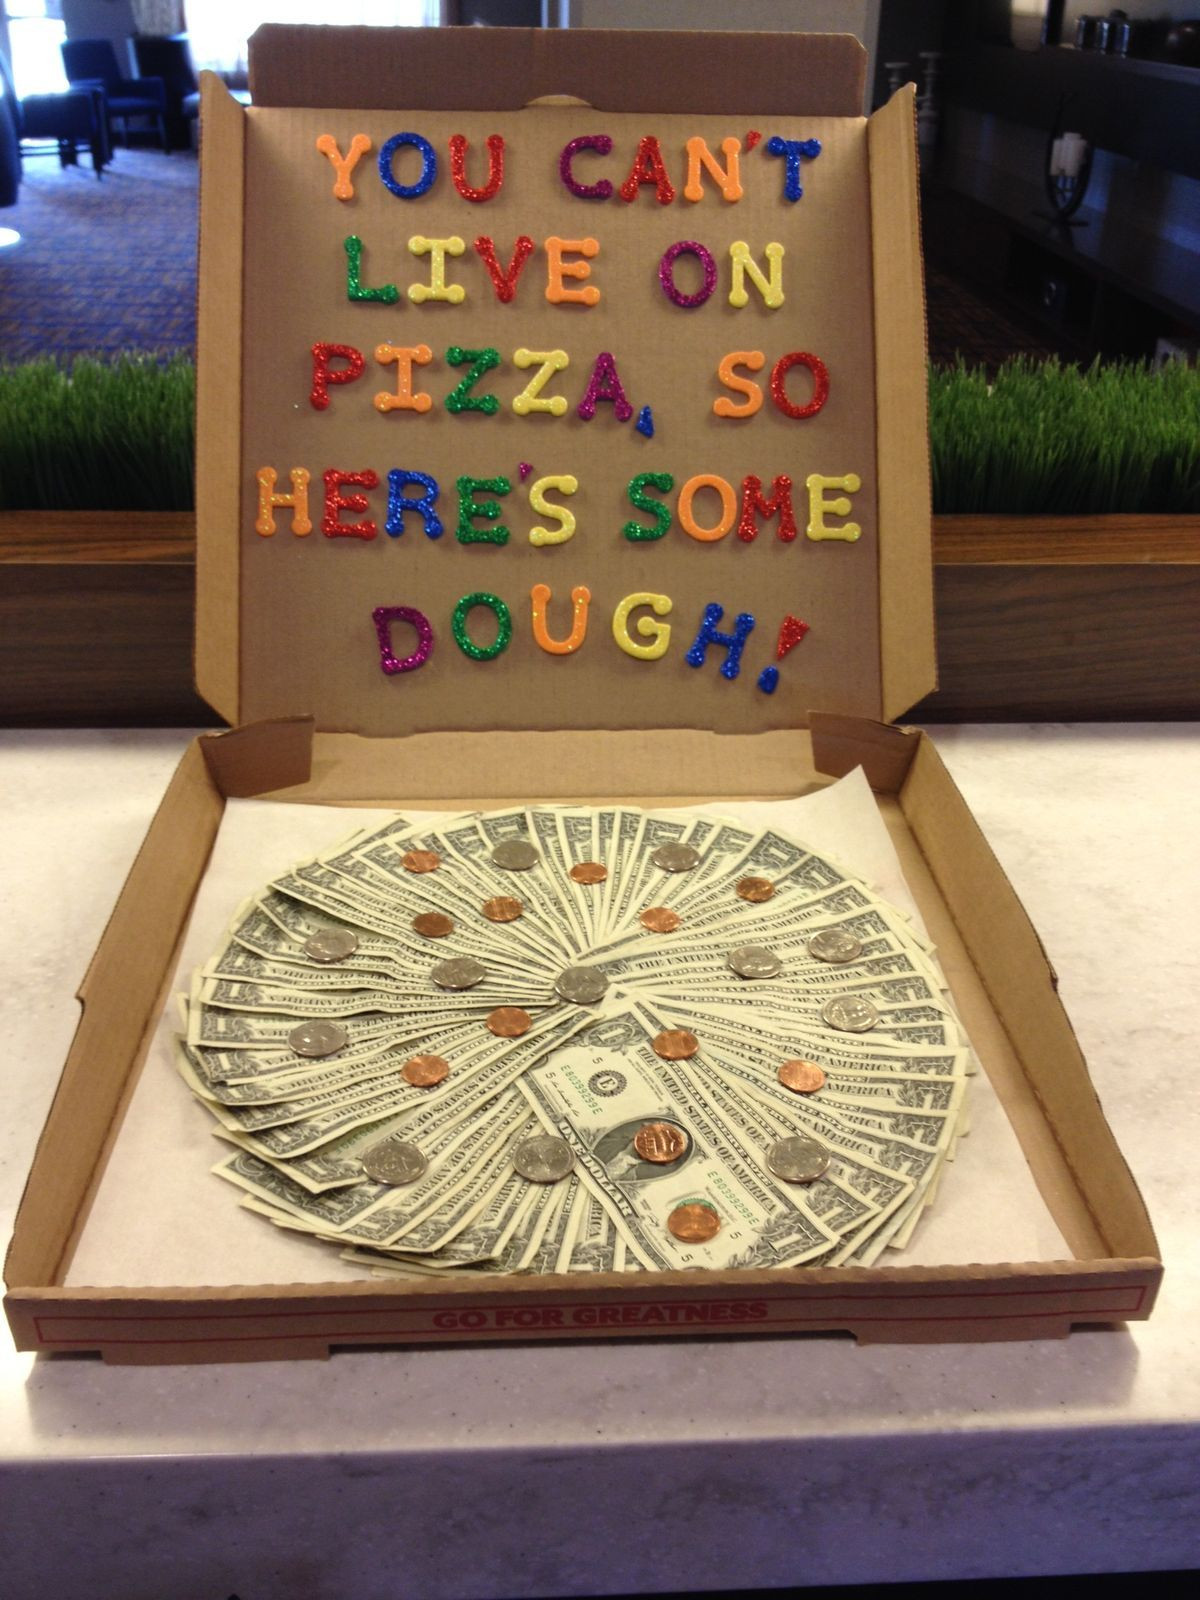 Son Graduation Gift Ideas
 You can t live on pizza so here s some dough fun way